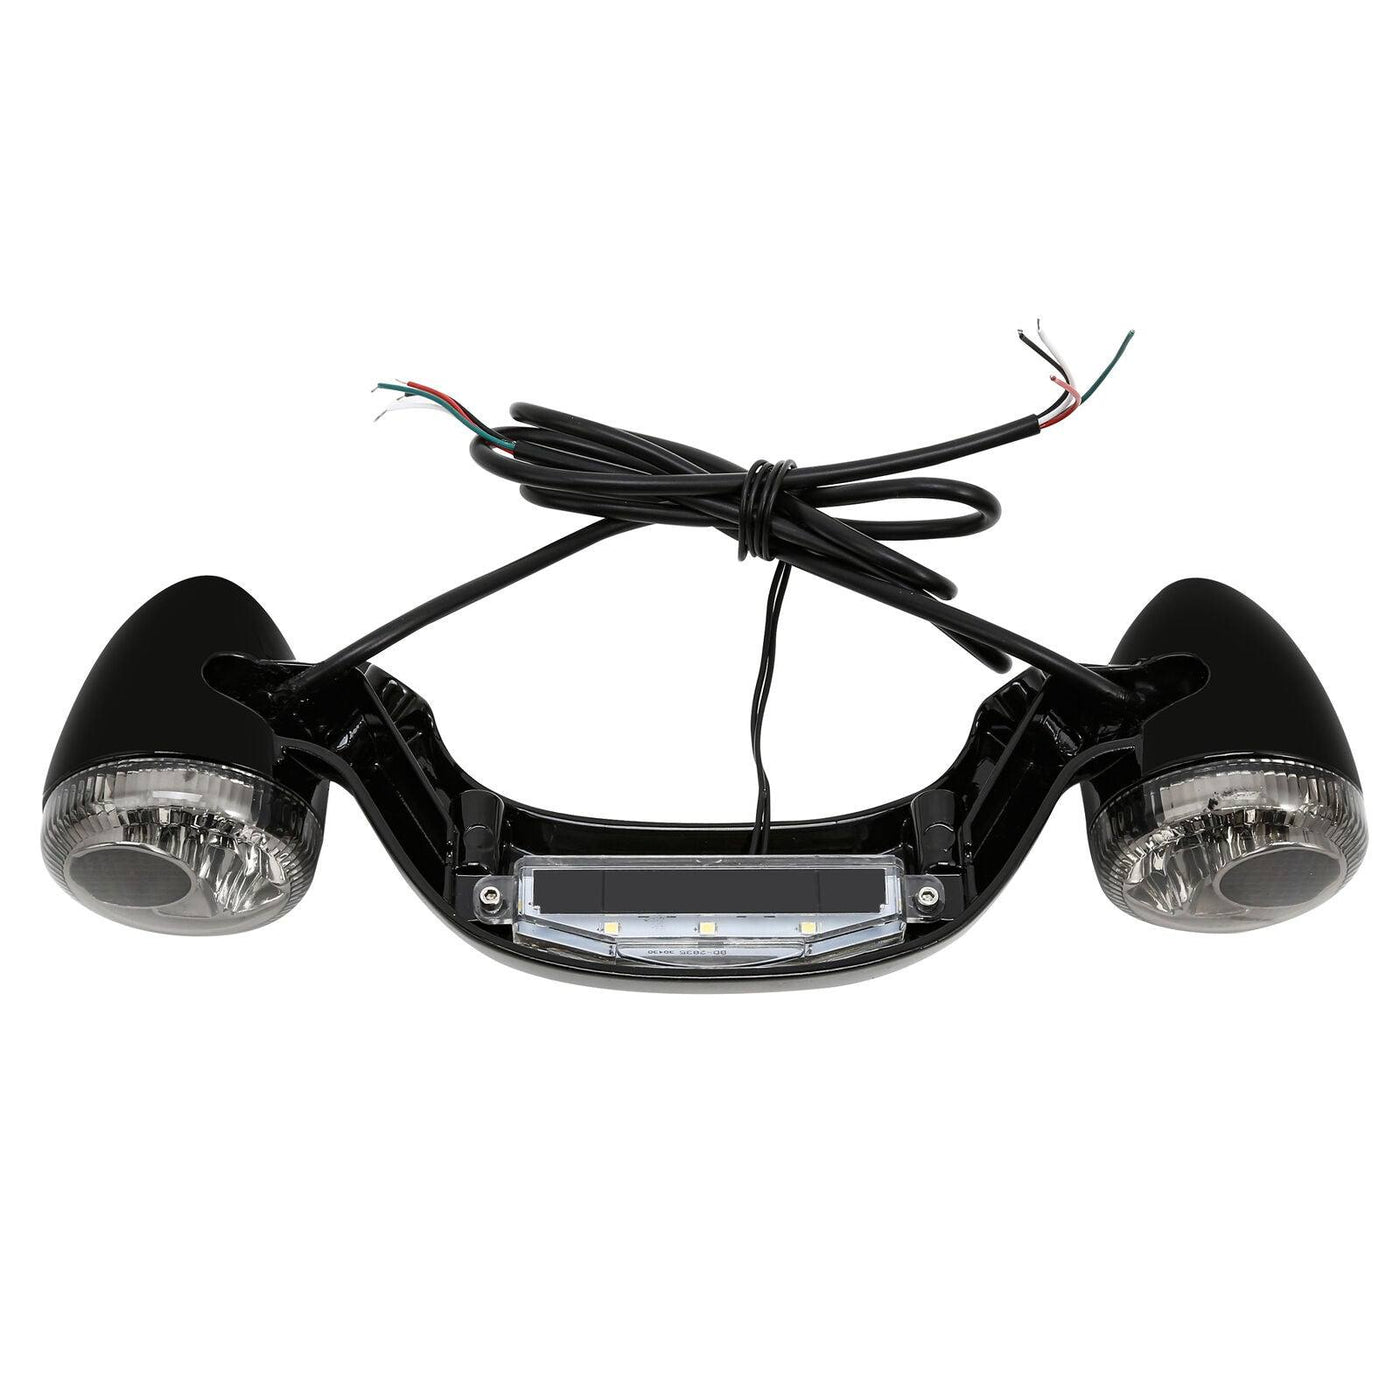 Rear Turn Signal LED Brake Light Bar Fit For Harley Road Street Glide 2010-2021 - Moto Life Products